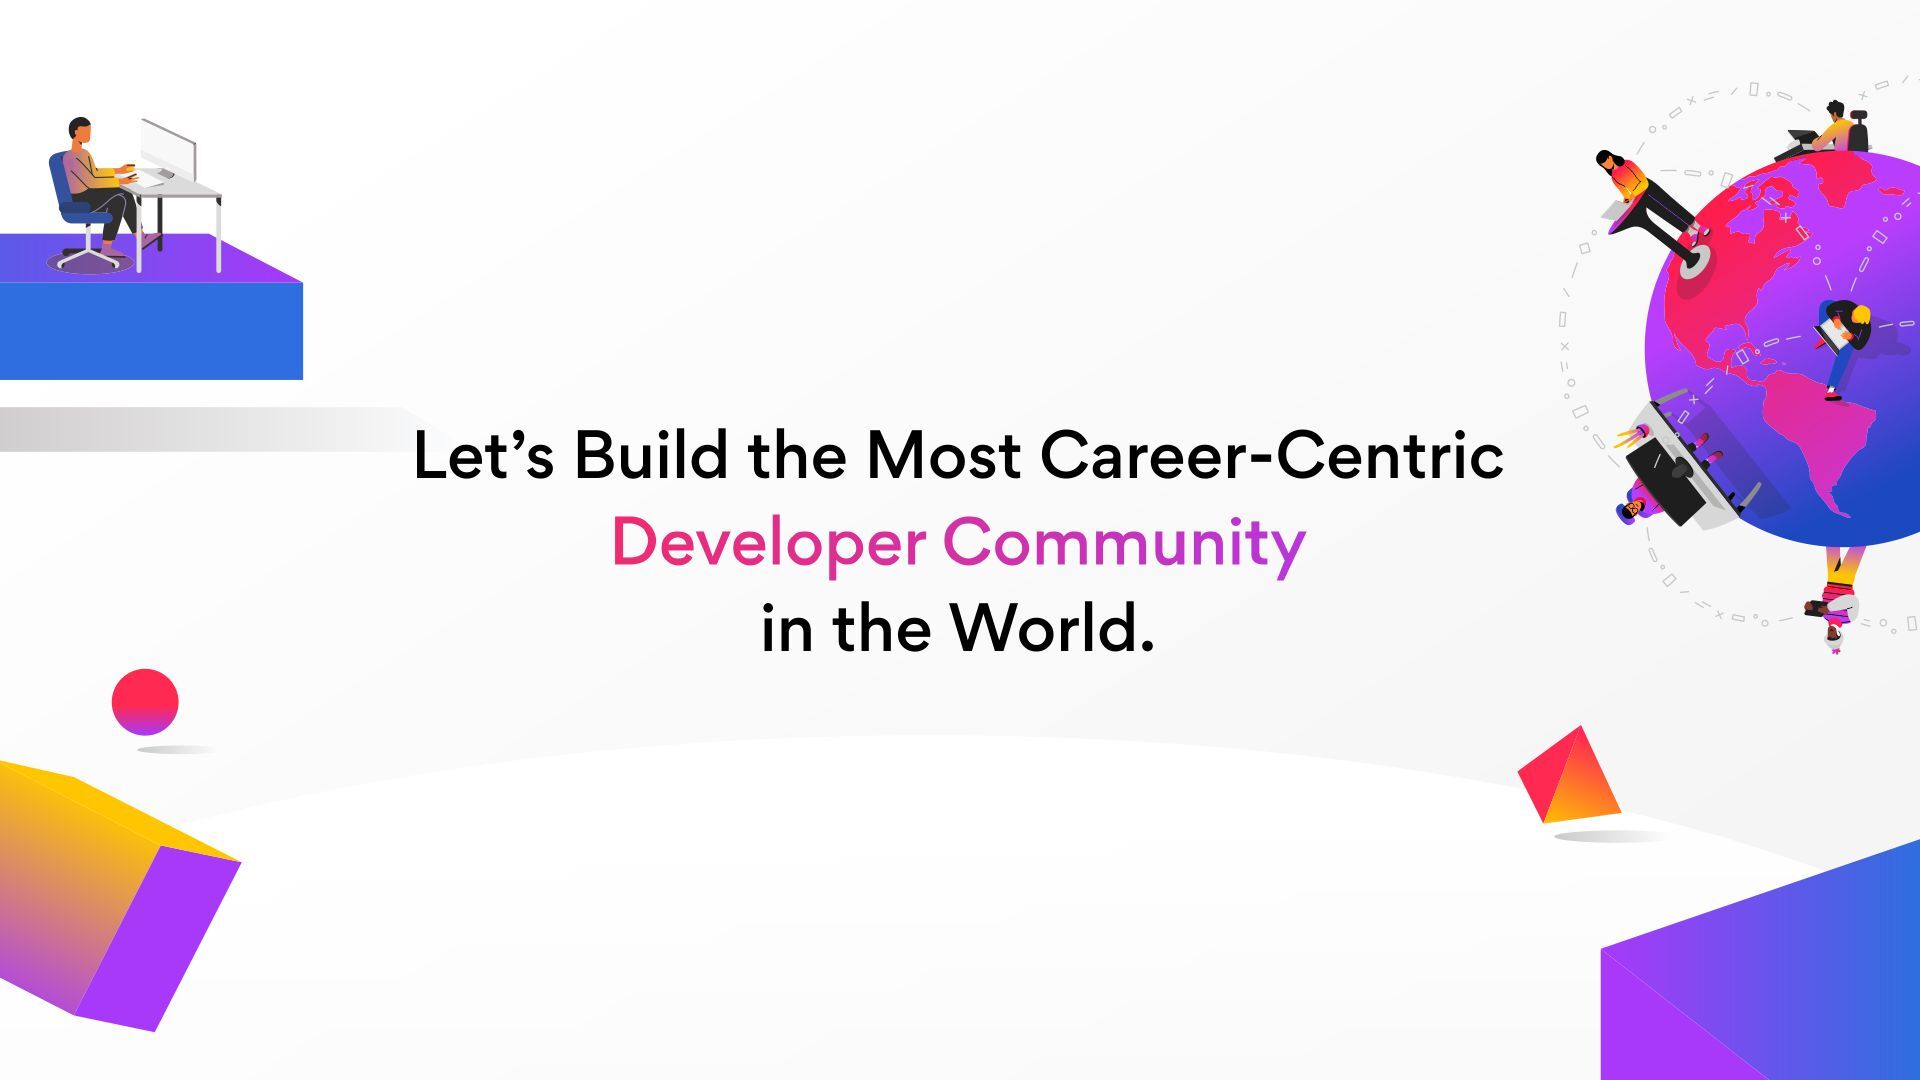 Turing.com Announces the Launch of its Developer Community